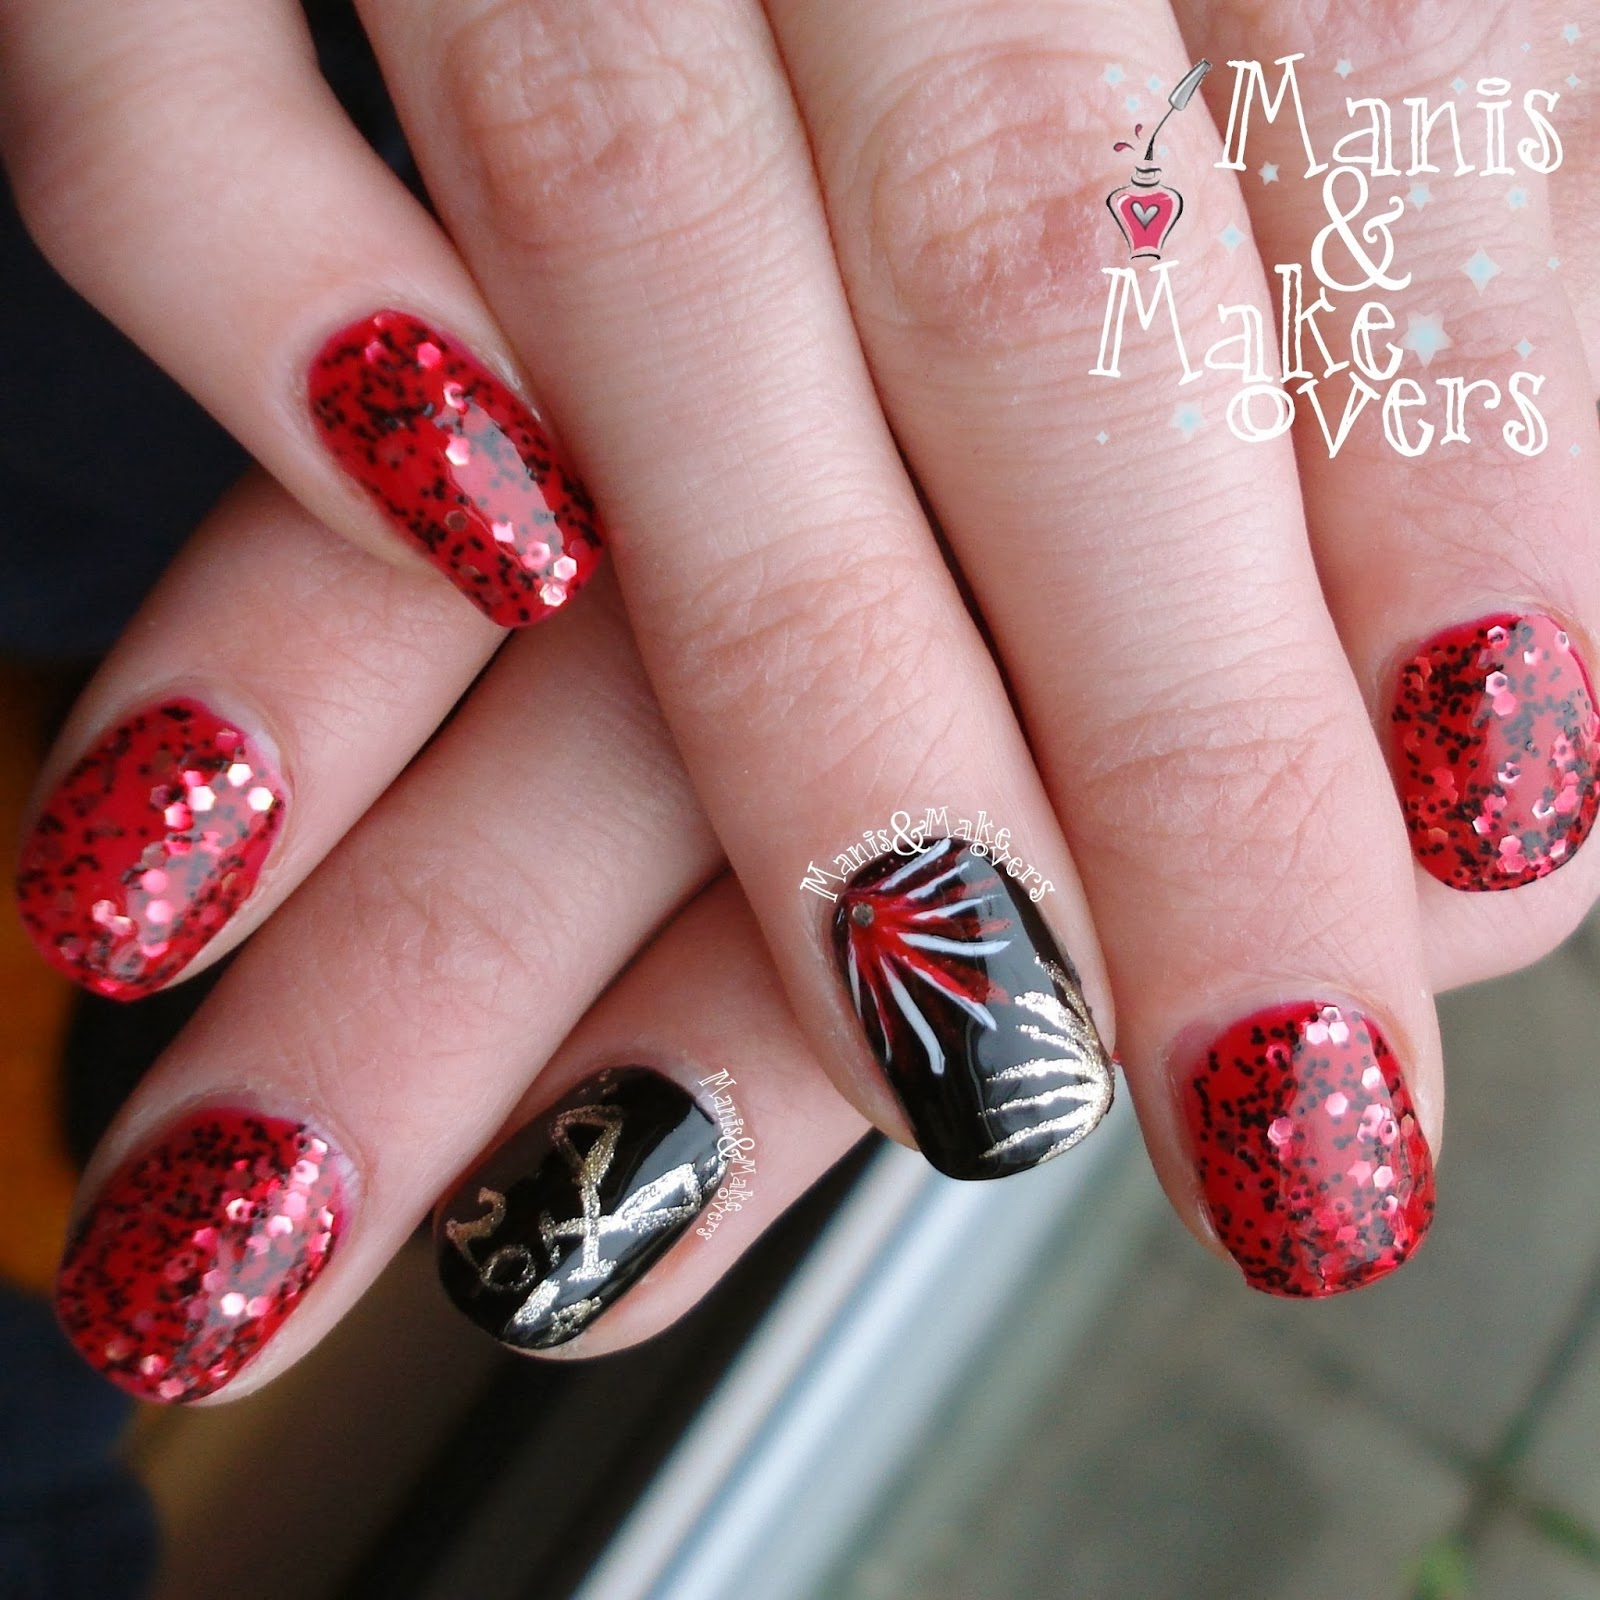 Manis & Makeovers: ManiMonday: My sister getting ready for NYE